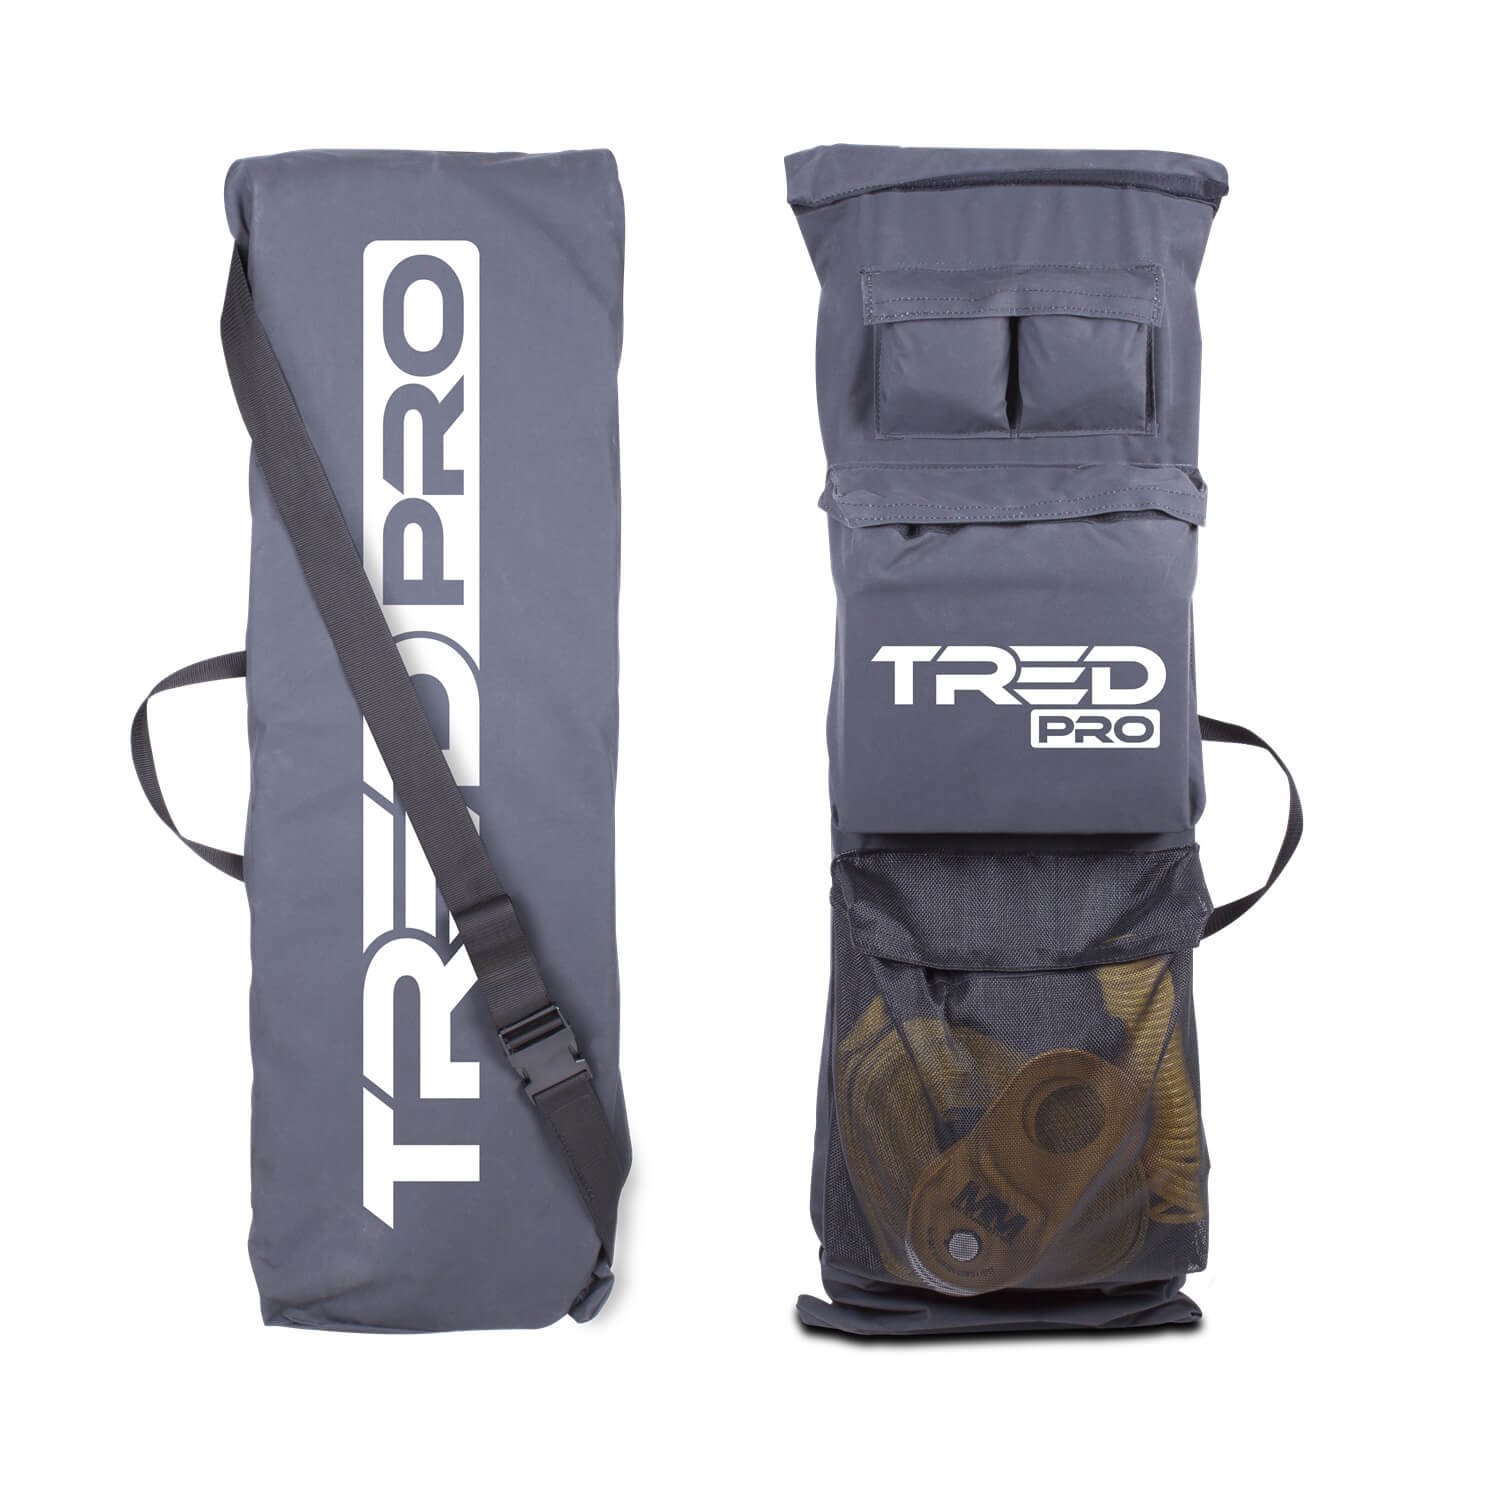 TPBAG TRED PRO Recovery Board Carry Bag